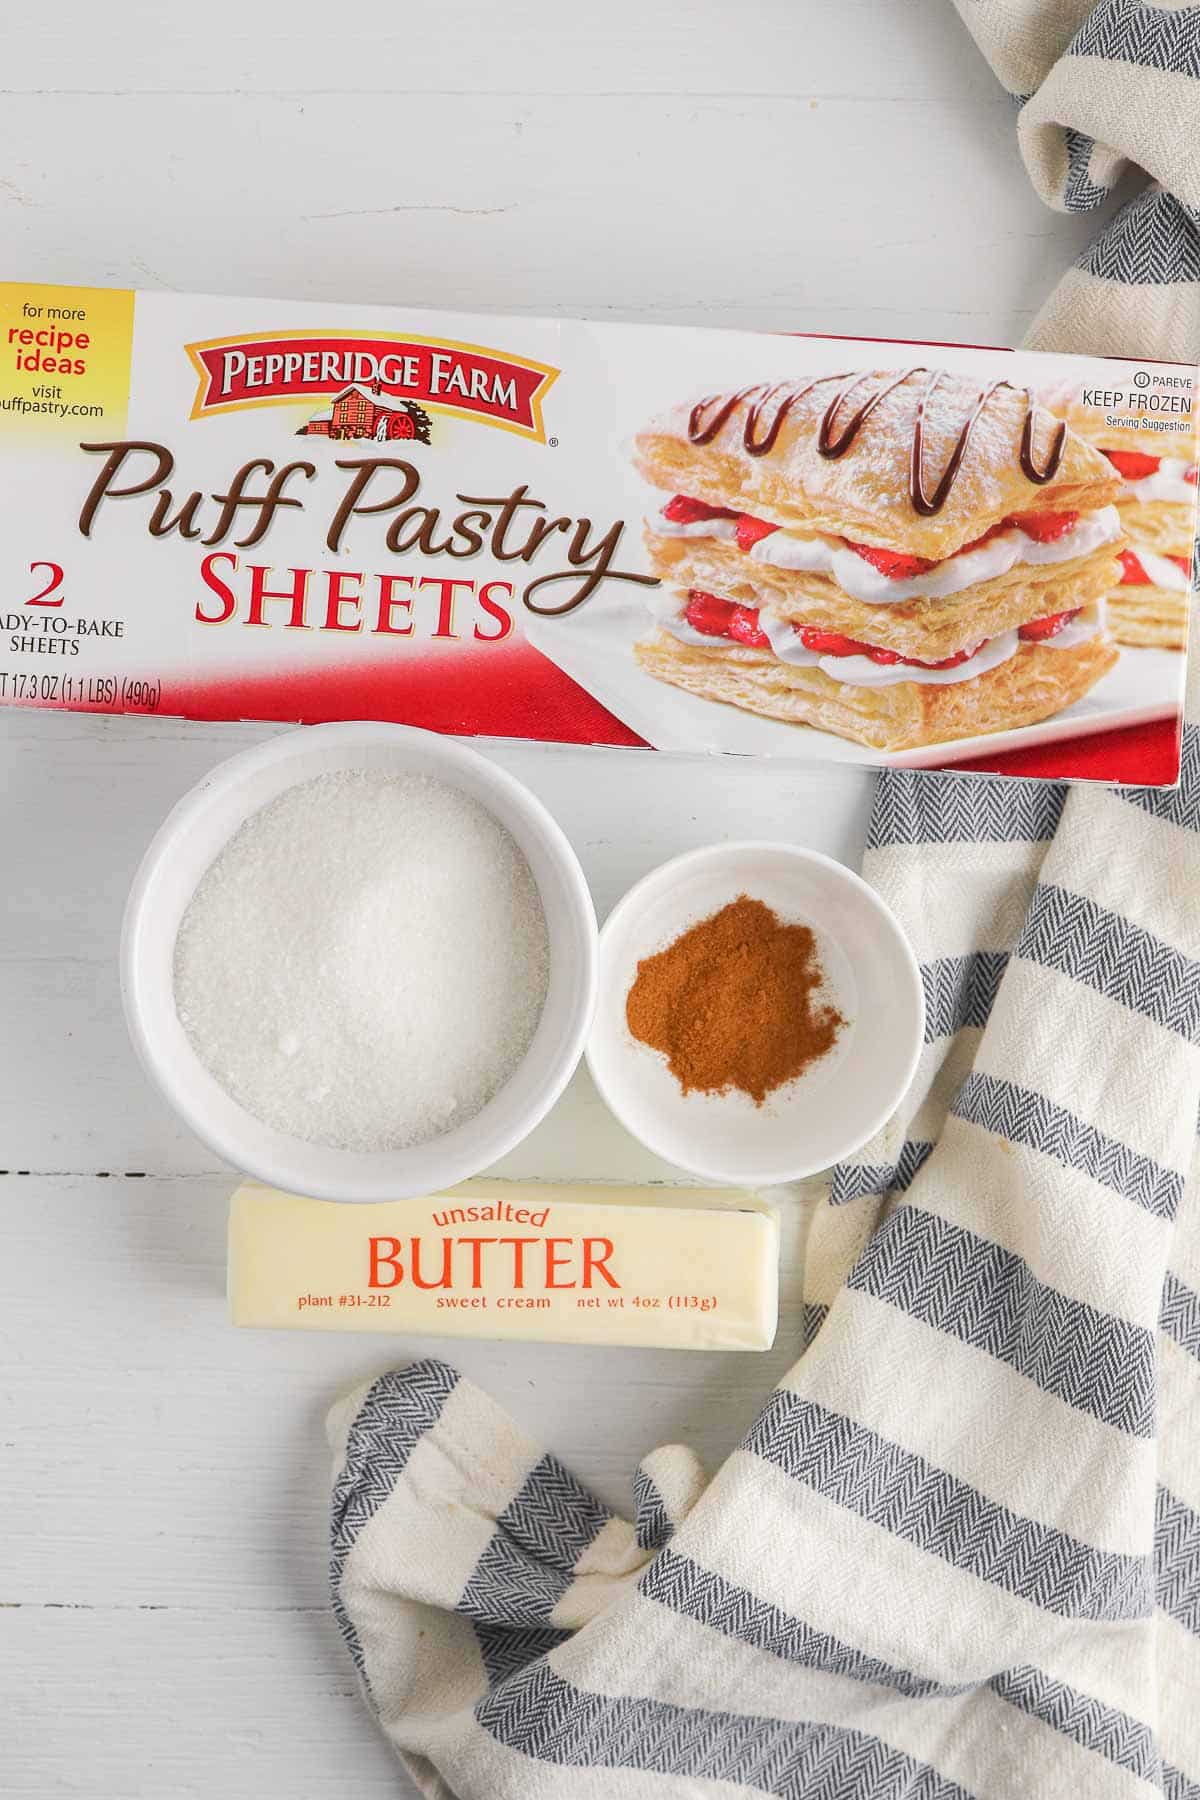 box of pepperidge farm puff pastry sheets, stick of butter, a small white bowl of sugar and a small bowl of ground cinnamon.